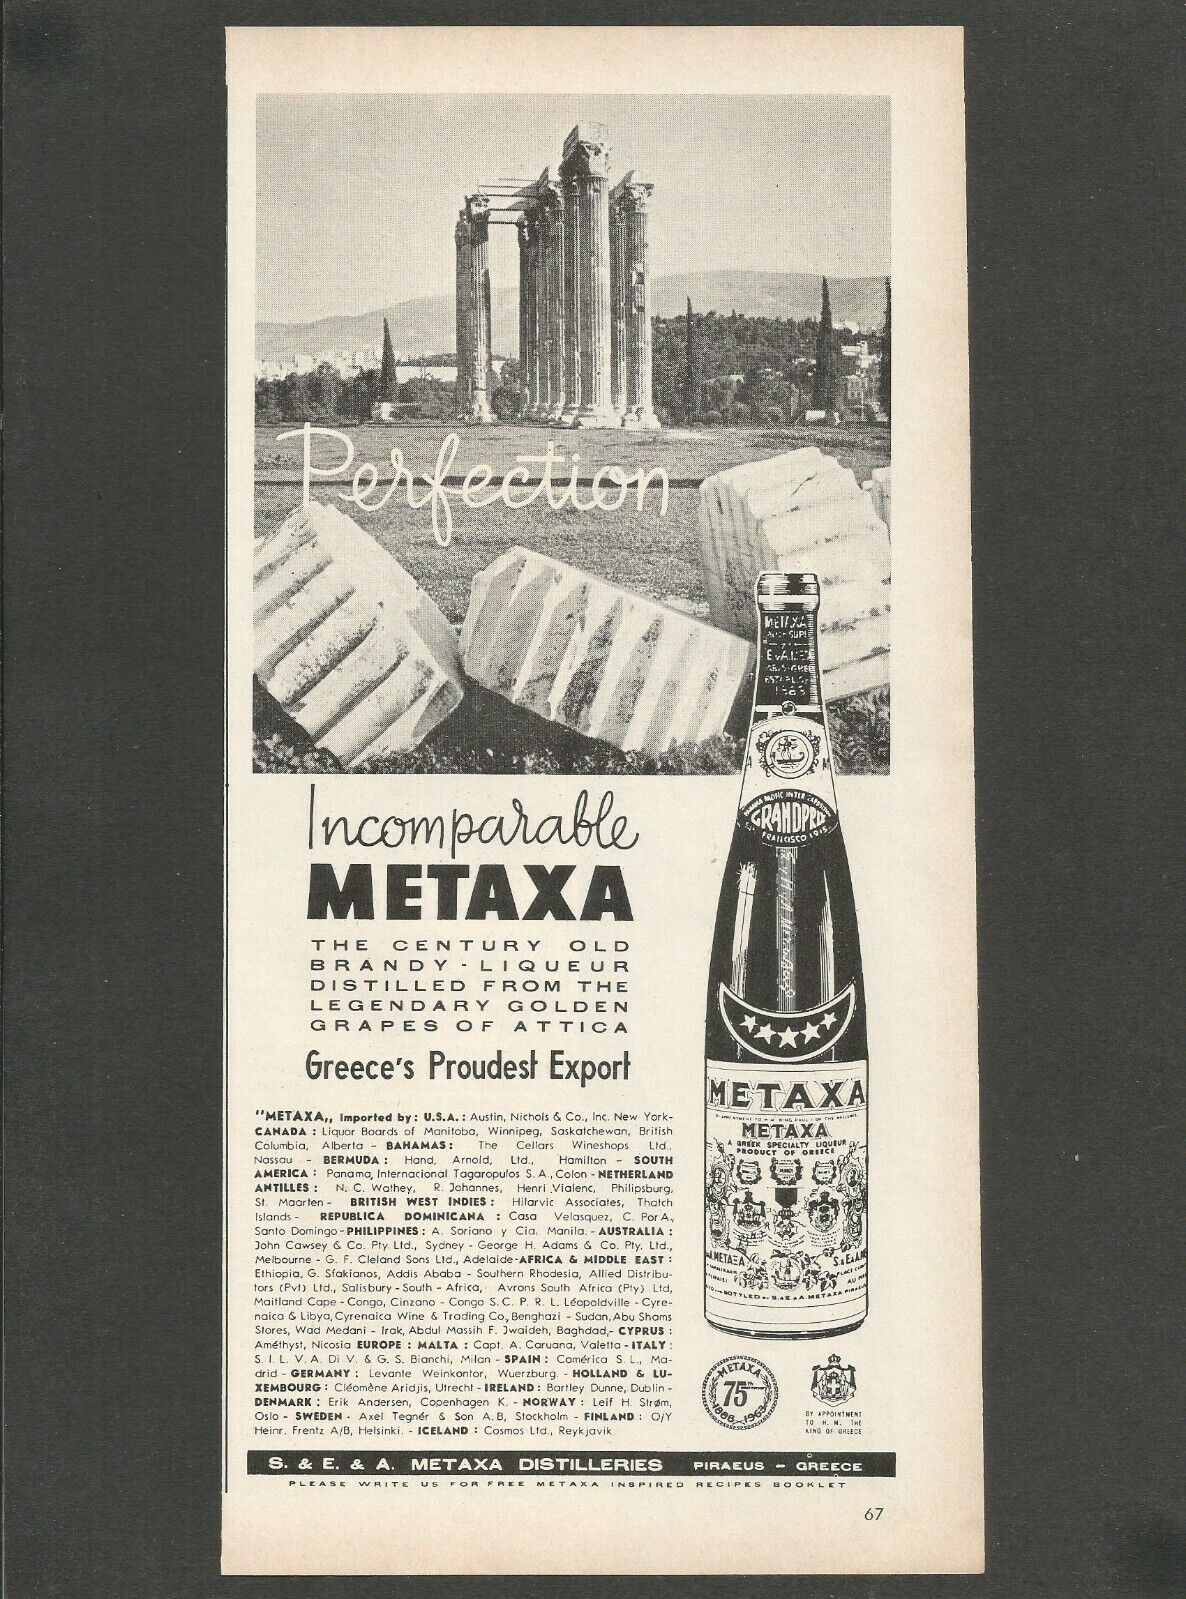 METAXA BRANDY - From the Golden Grapes of Attica - 1964 Vintage Print Ad